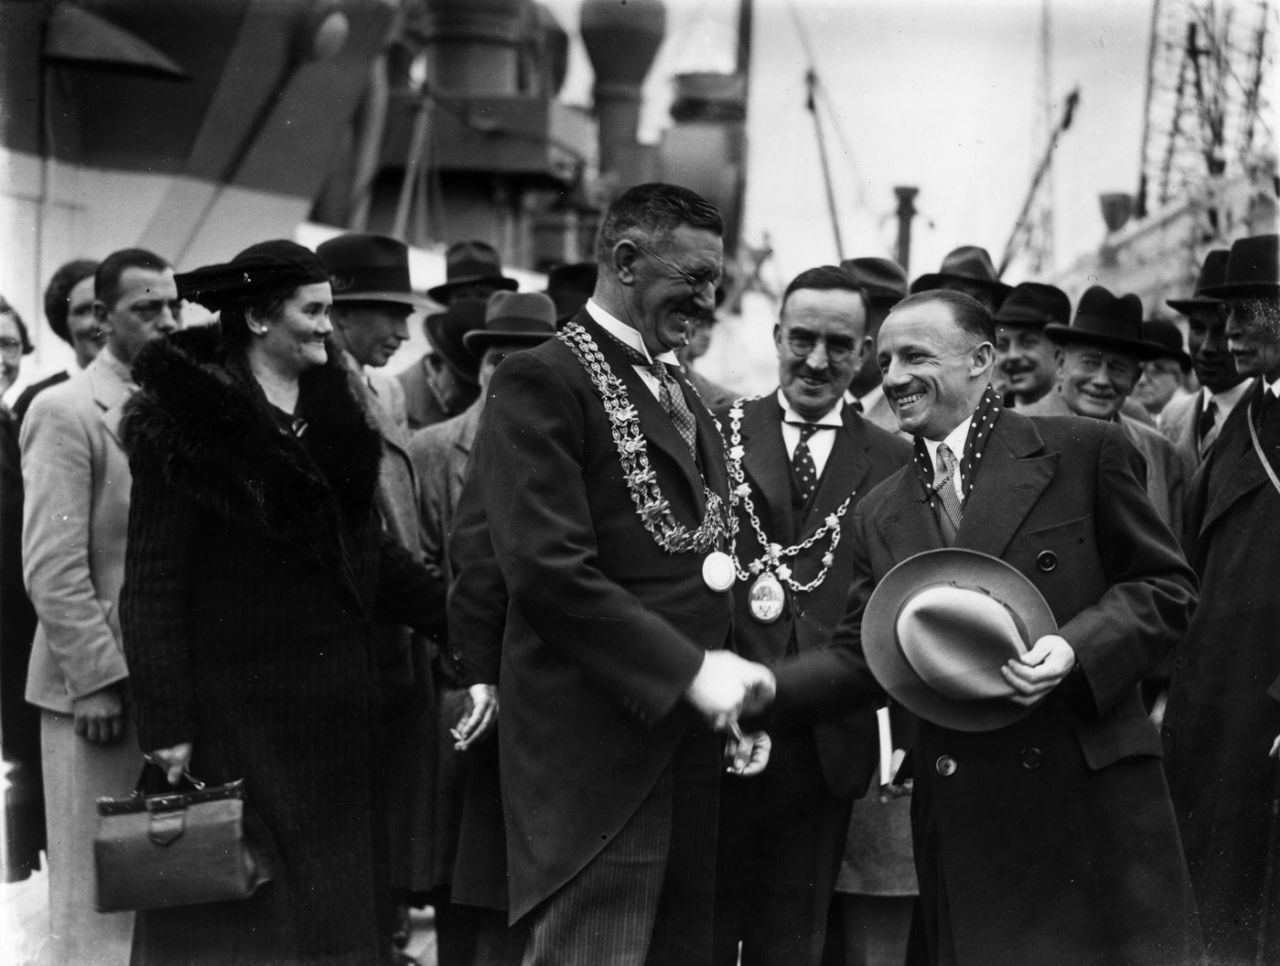 Australian captain Don Bradman is greeted by deputy mayor of Southampton on the team's arrival for the Ashes, April 20, 1938